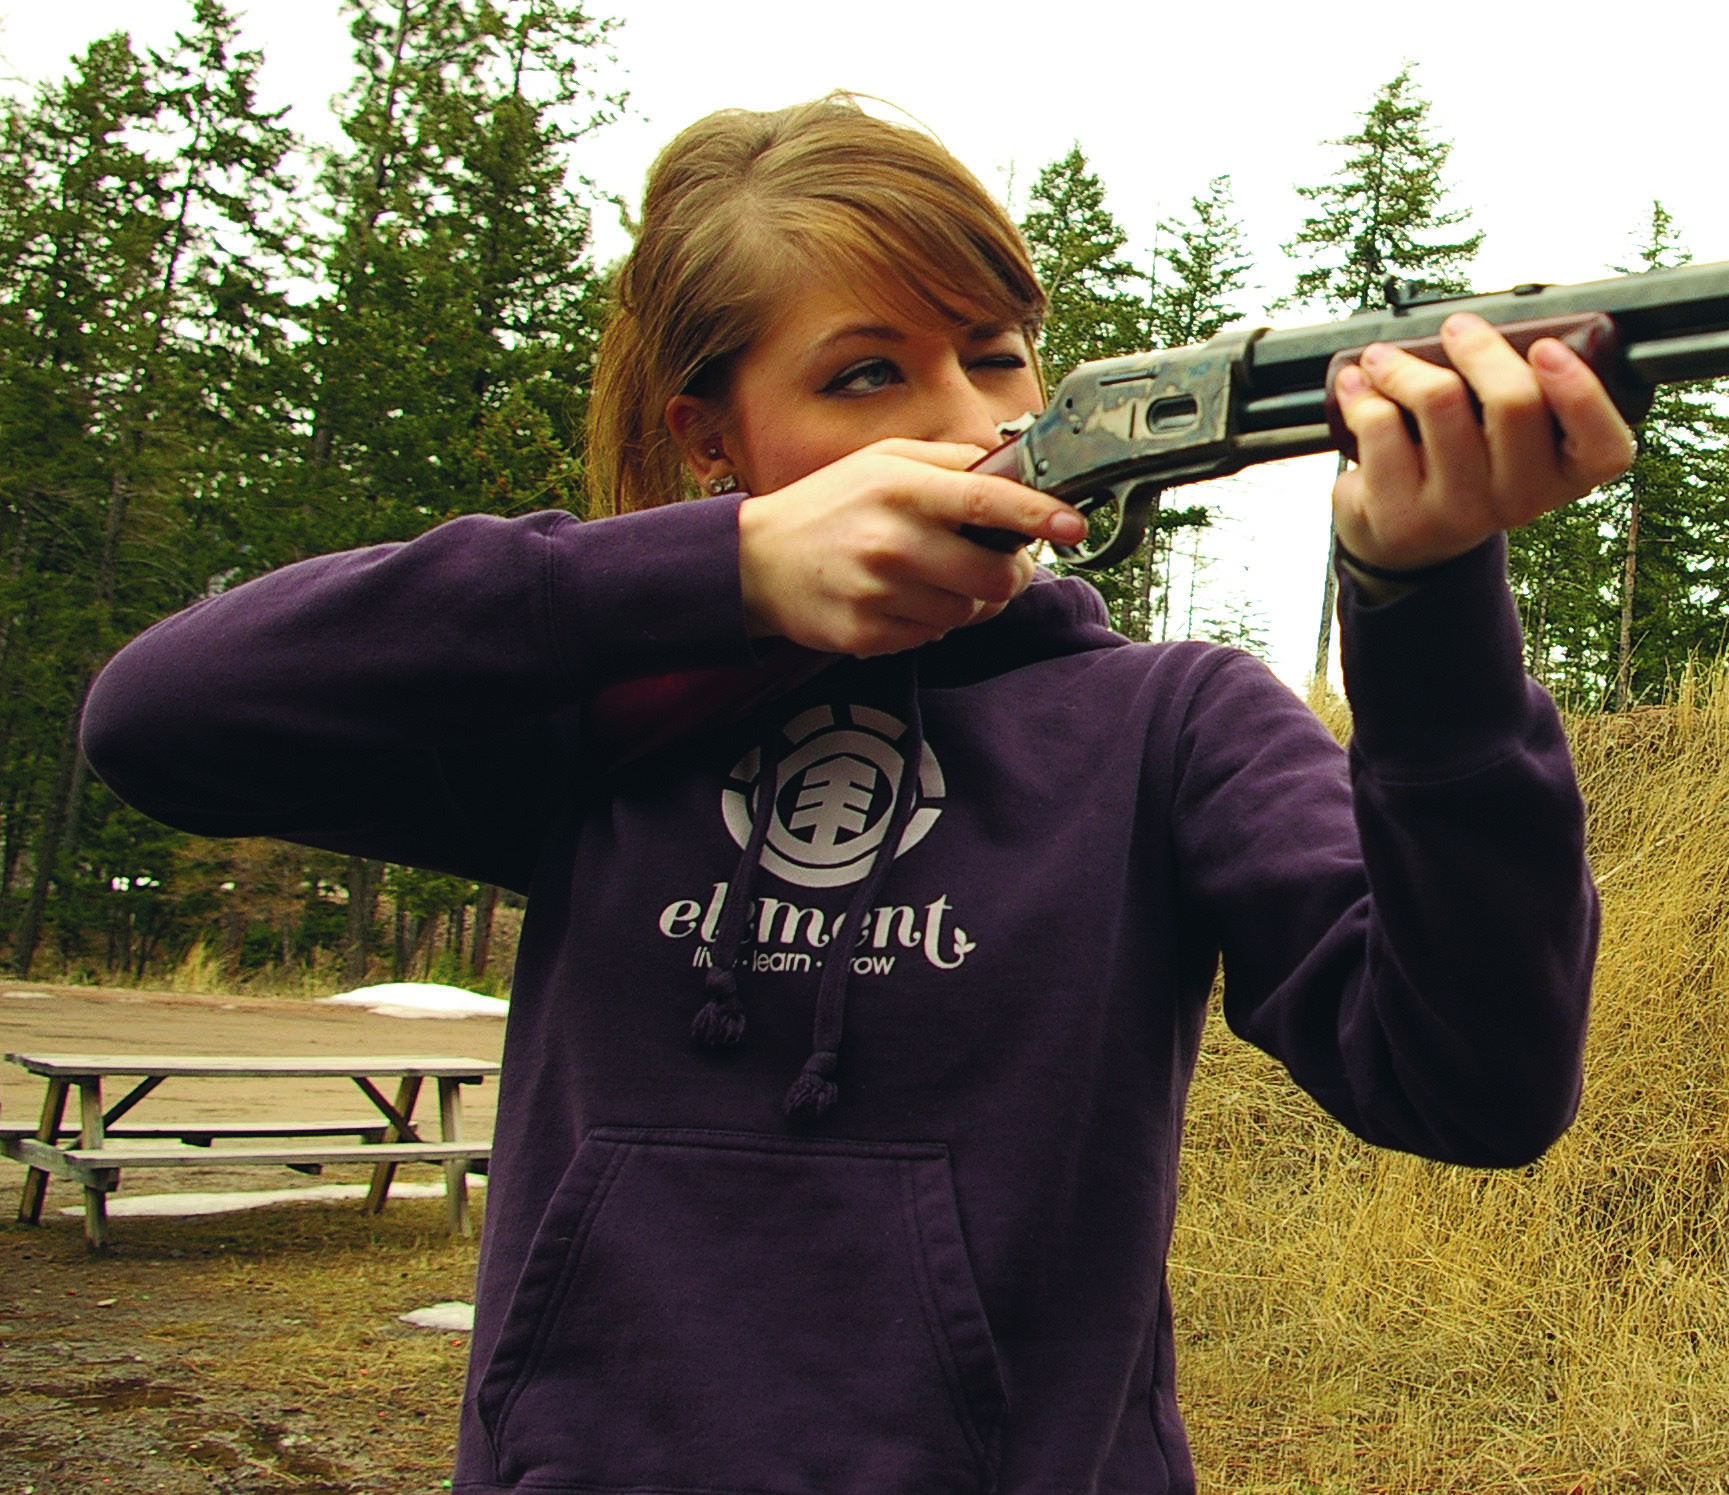 Mikayla Midtlyng is shooting the Uberti Lightning Short Rifle .357 Magnum like there is no tomorrow.